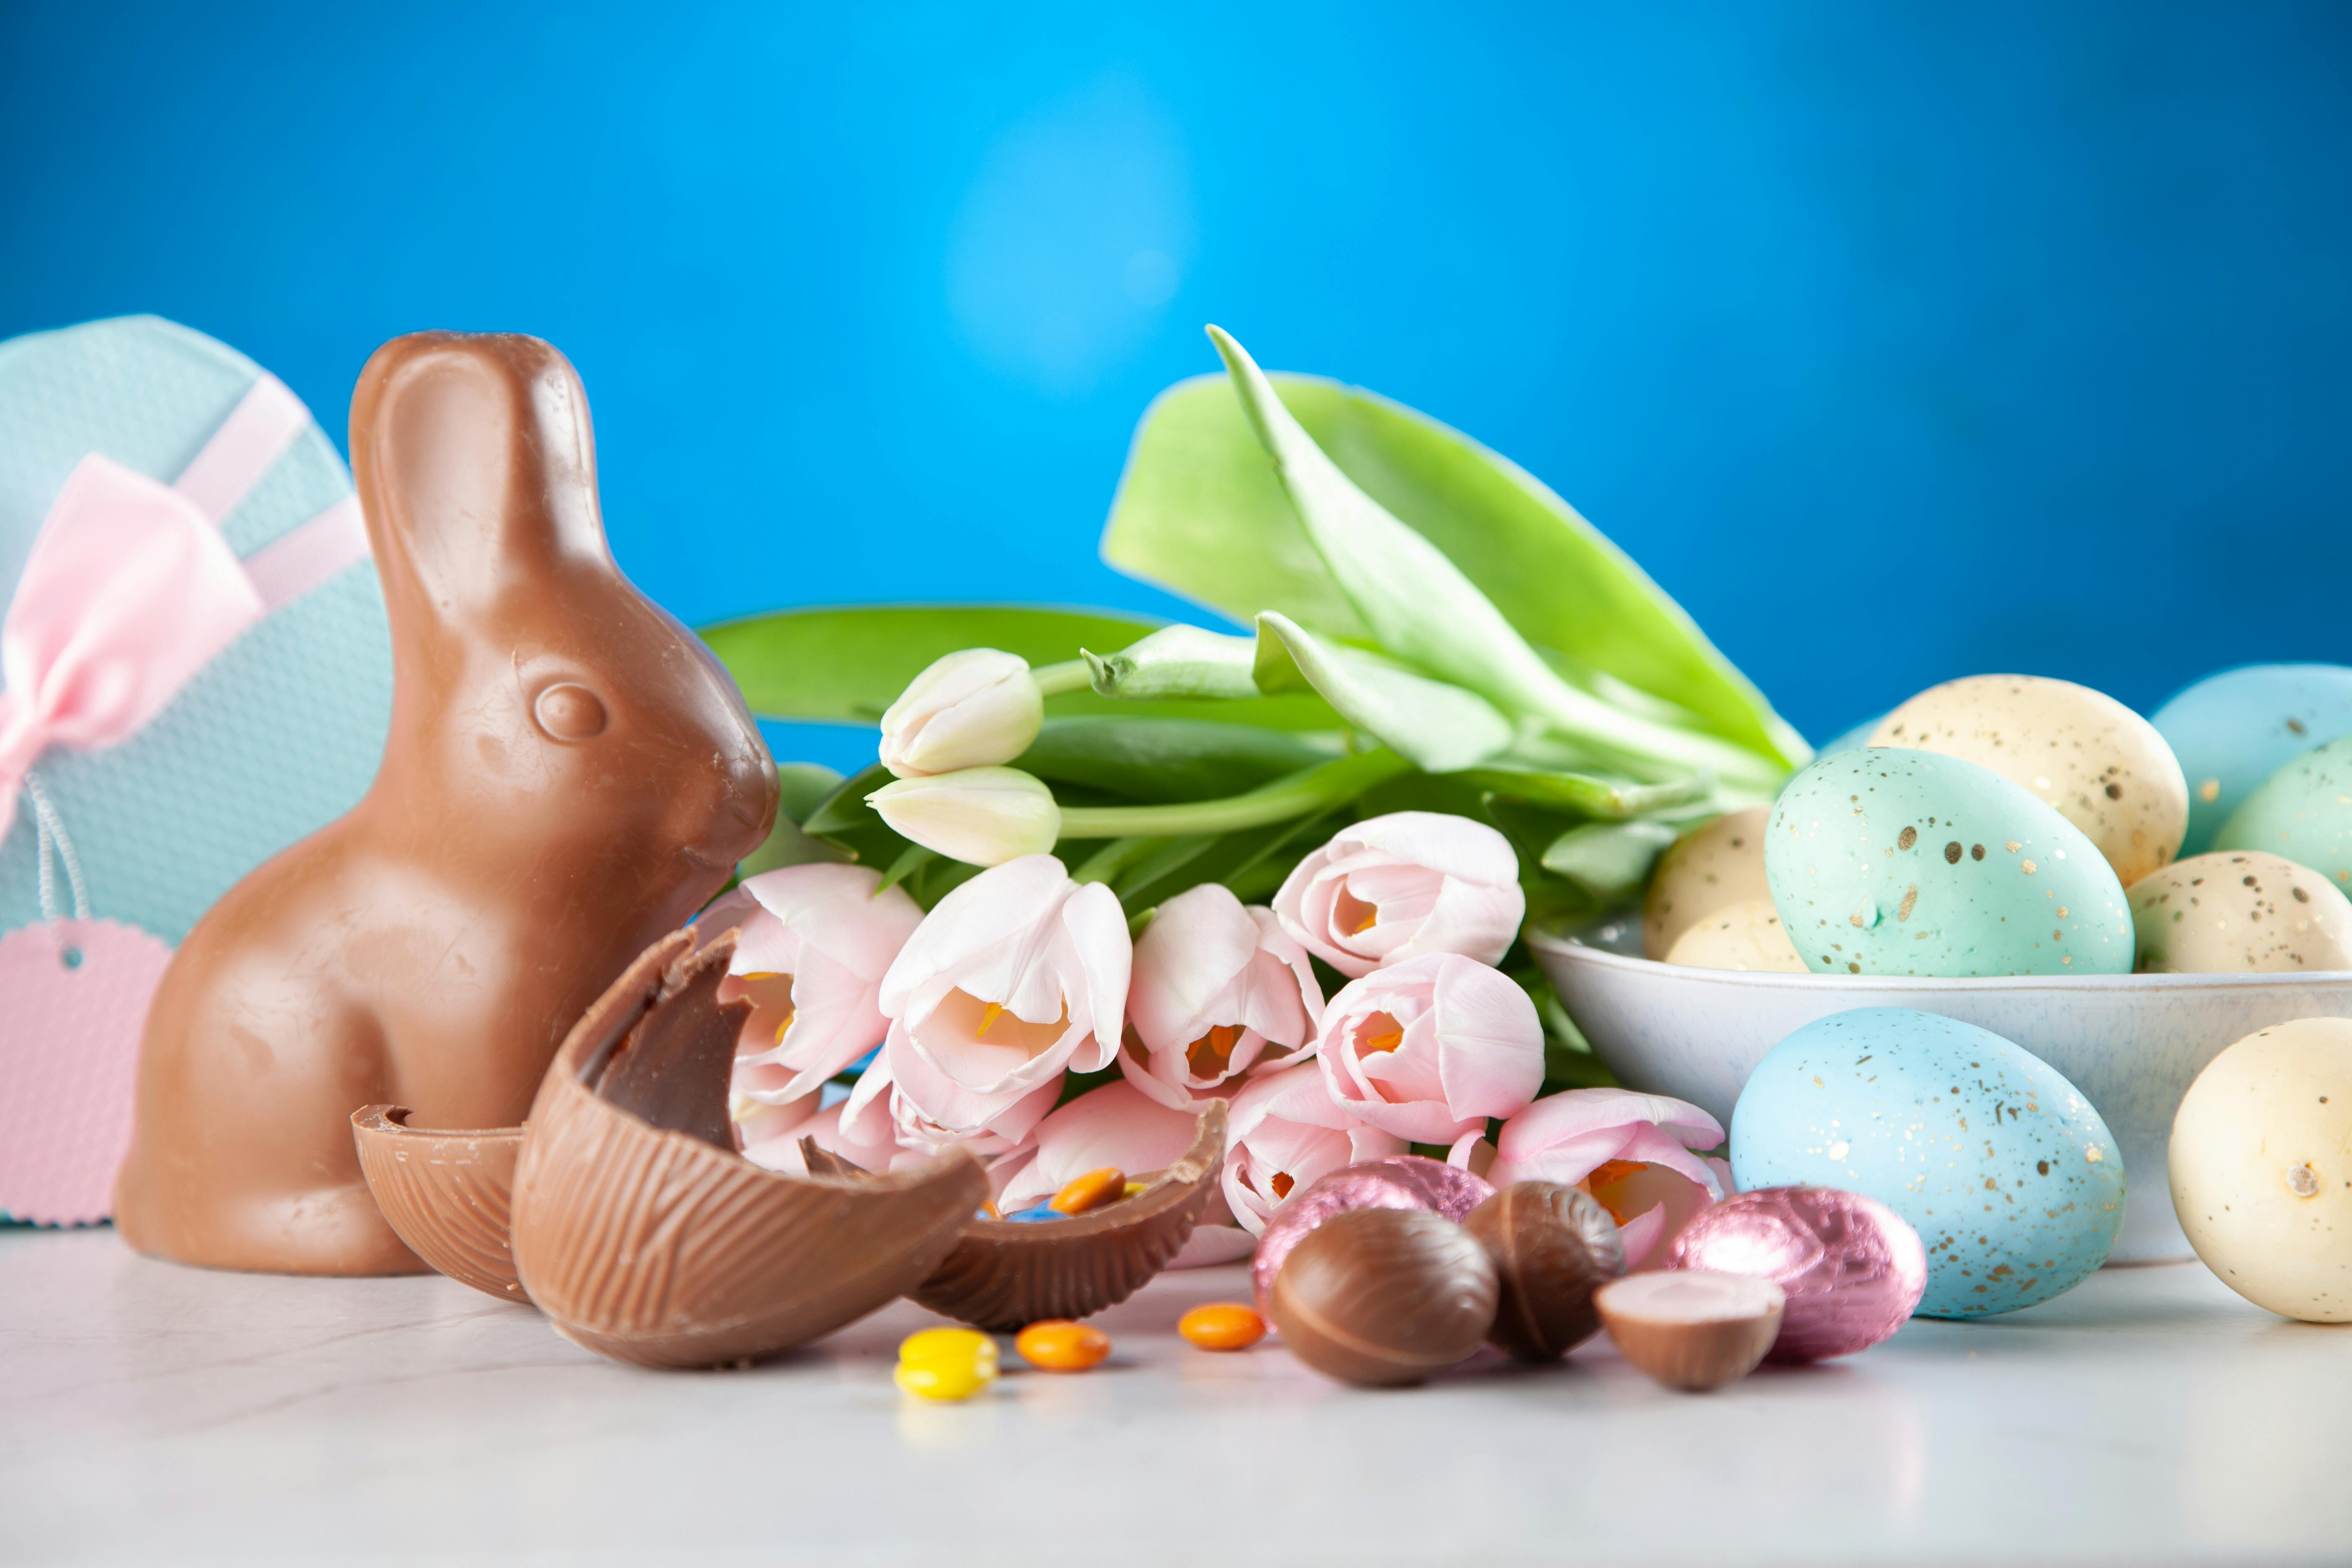 A rabbit figure, tulips, and coloured eggs